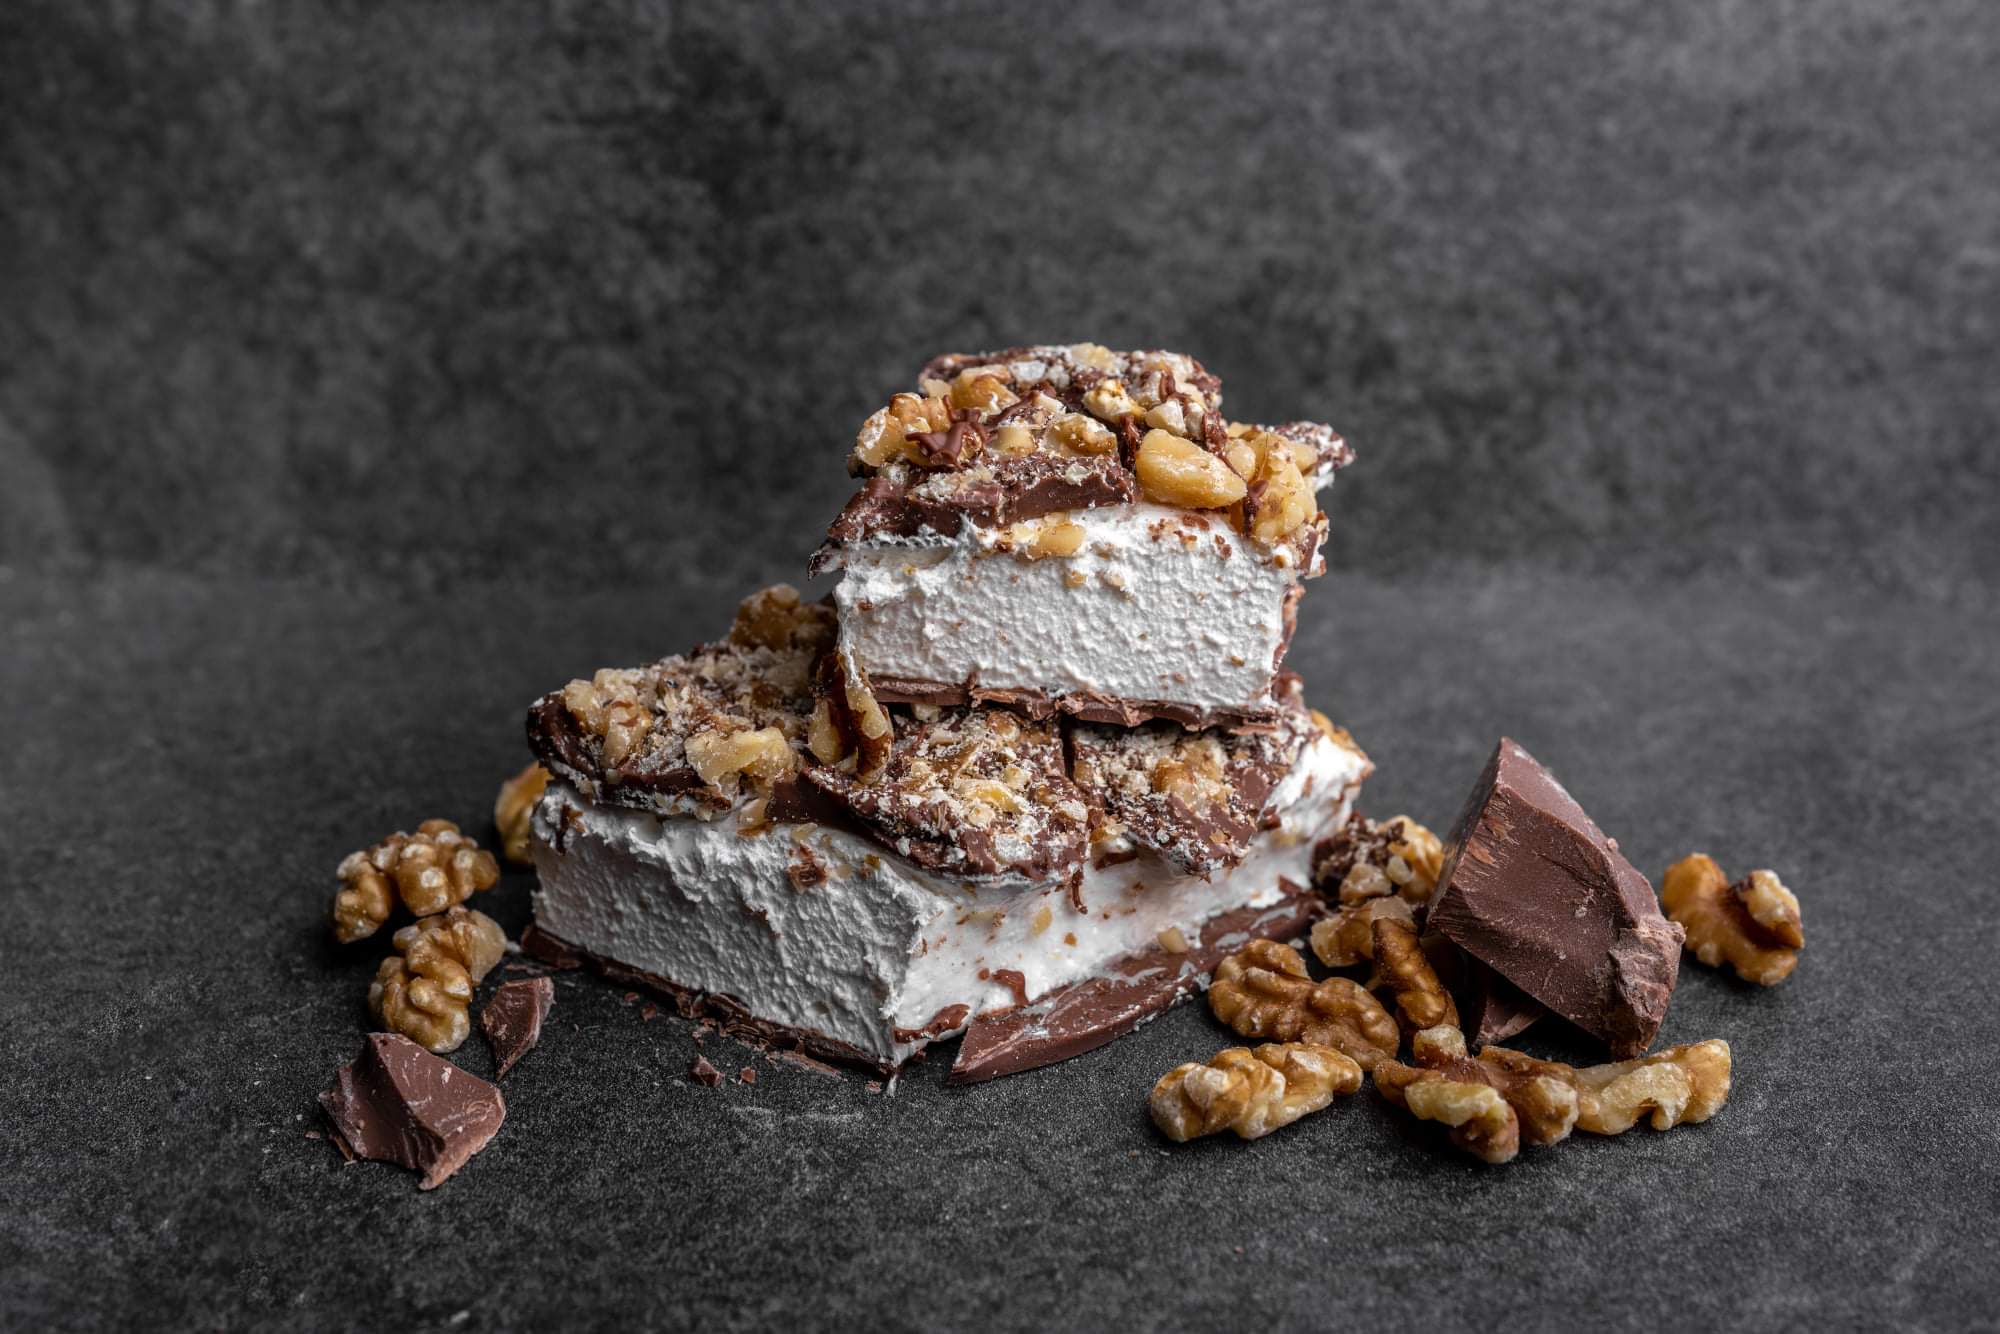 squares of chocolate covered nougat with nut topping